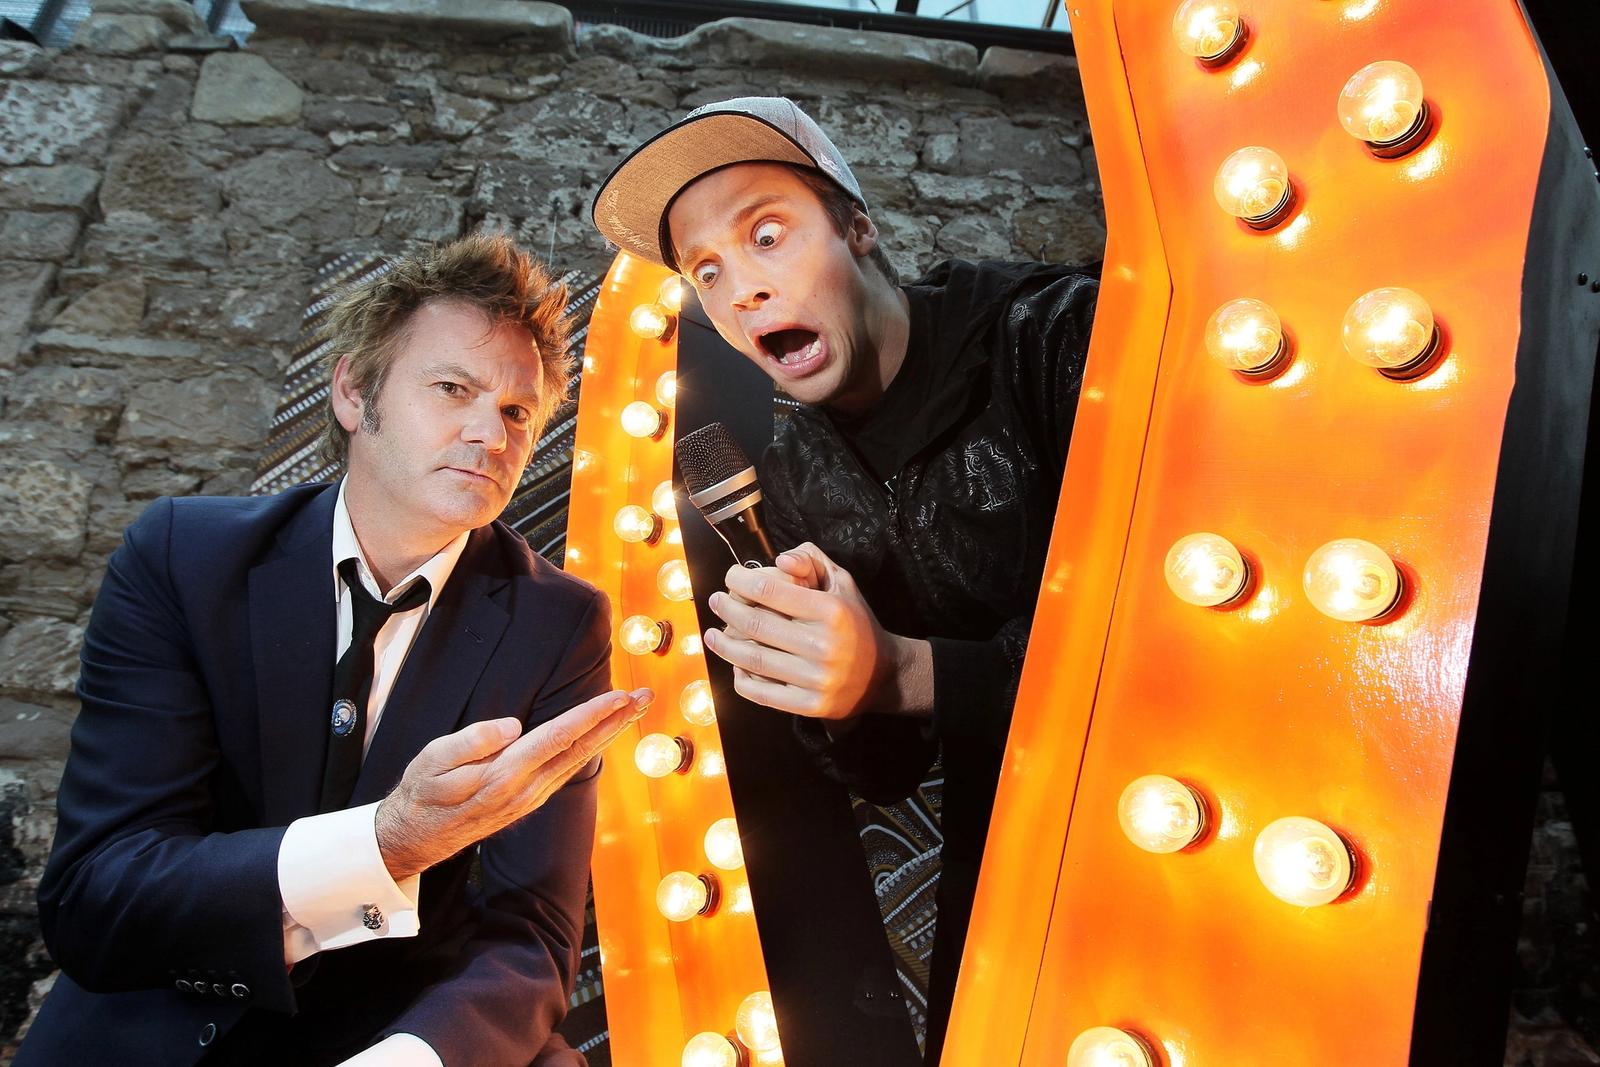 Musician and comedian Paul McDermott with Beatboxer Tom Thum